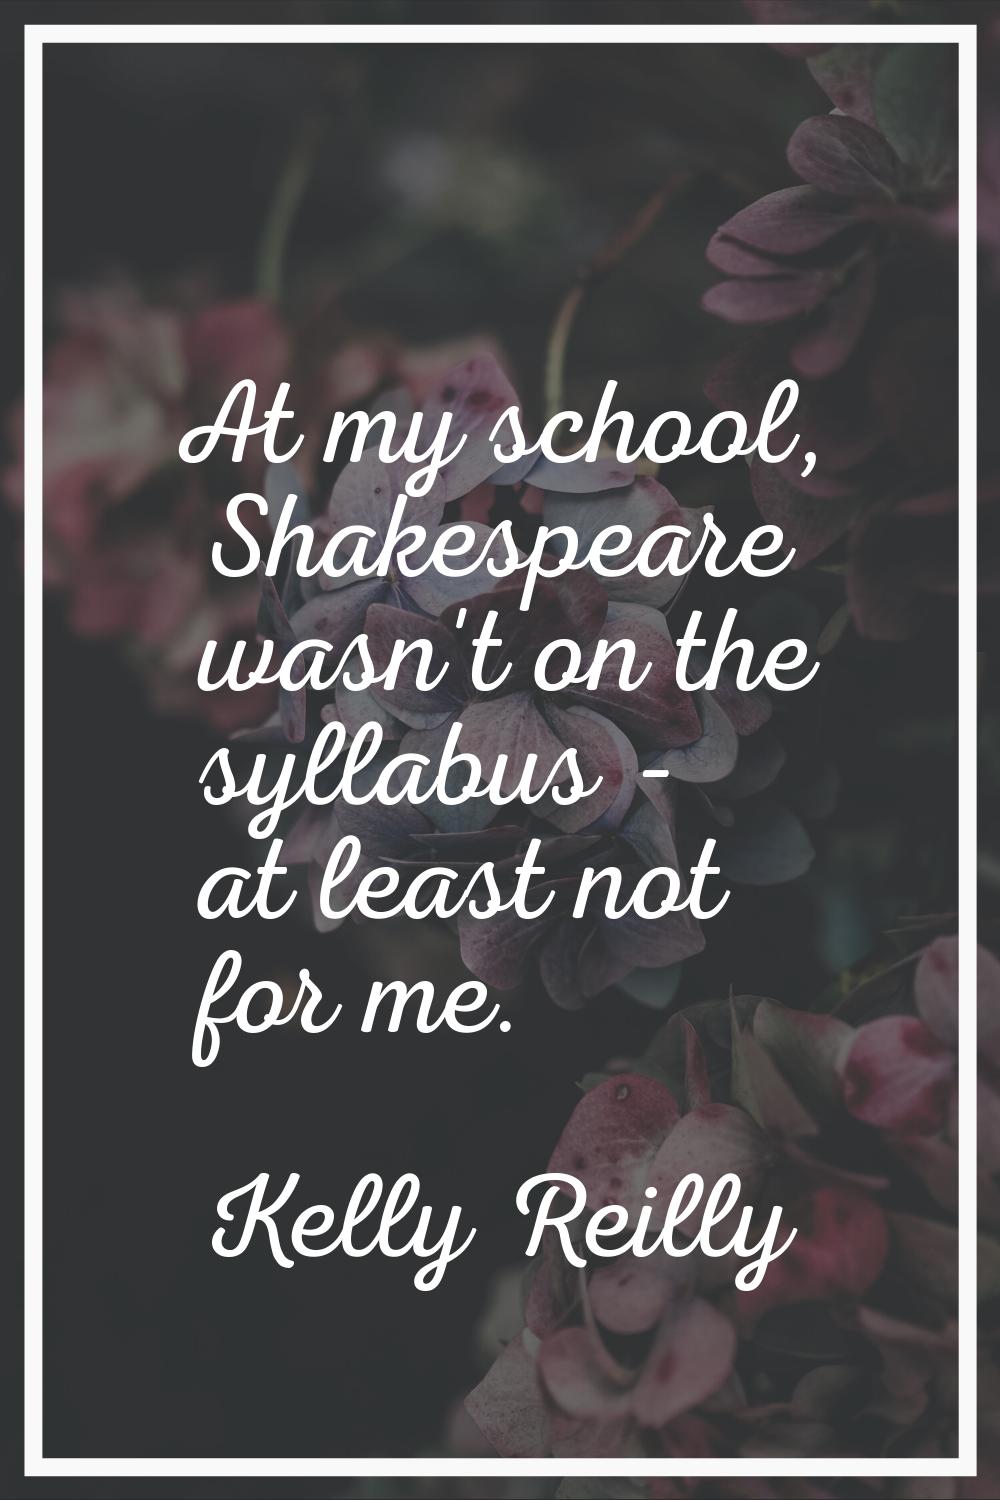 At my school, Shakespeare wasn't on the syllabus - at least not for me.